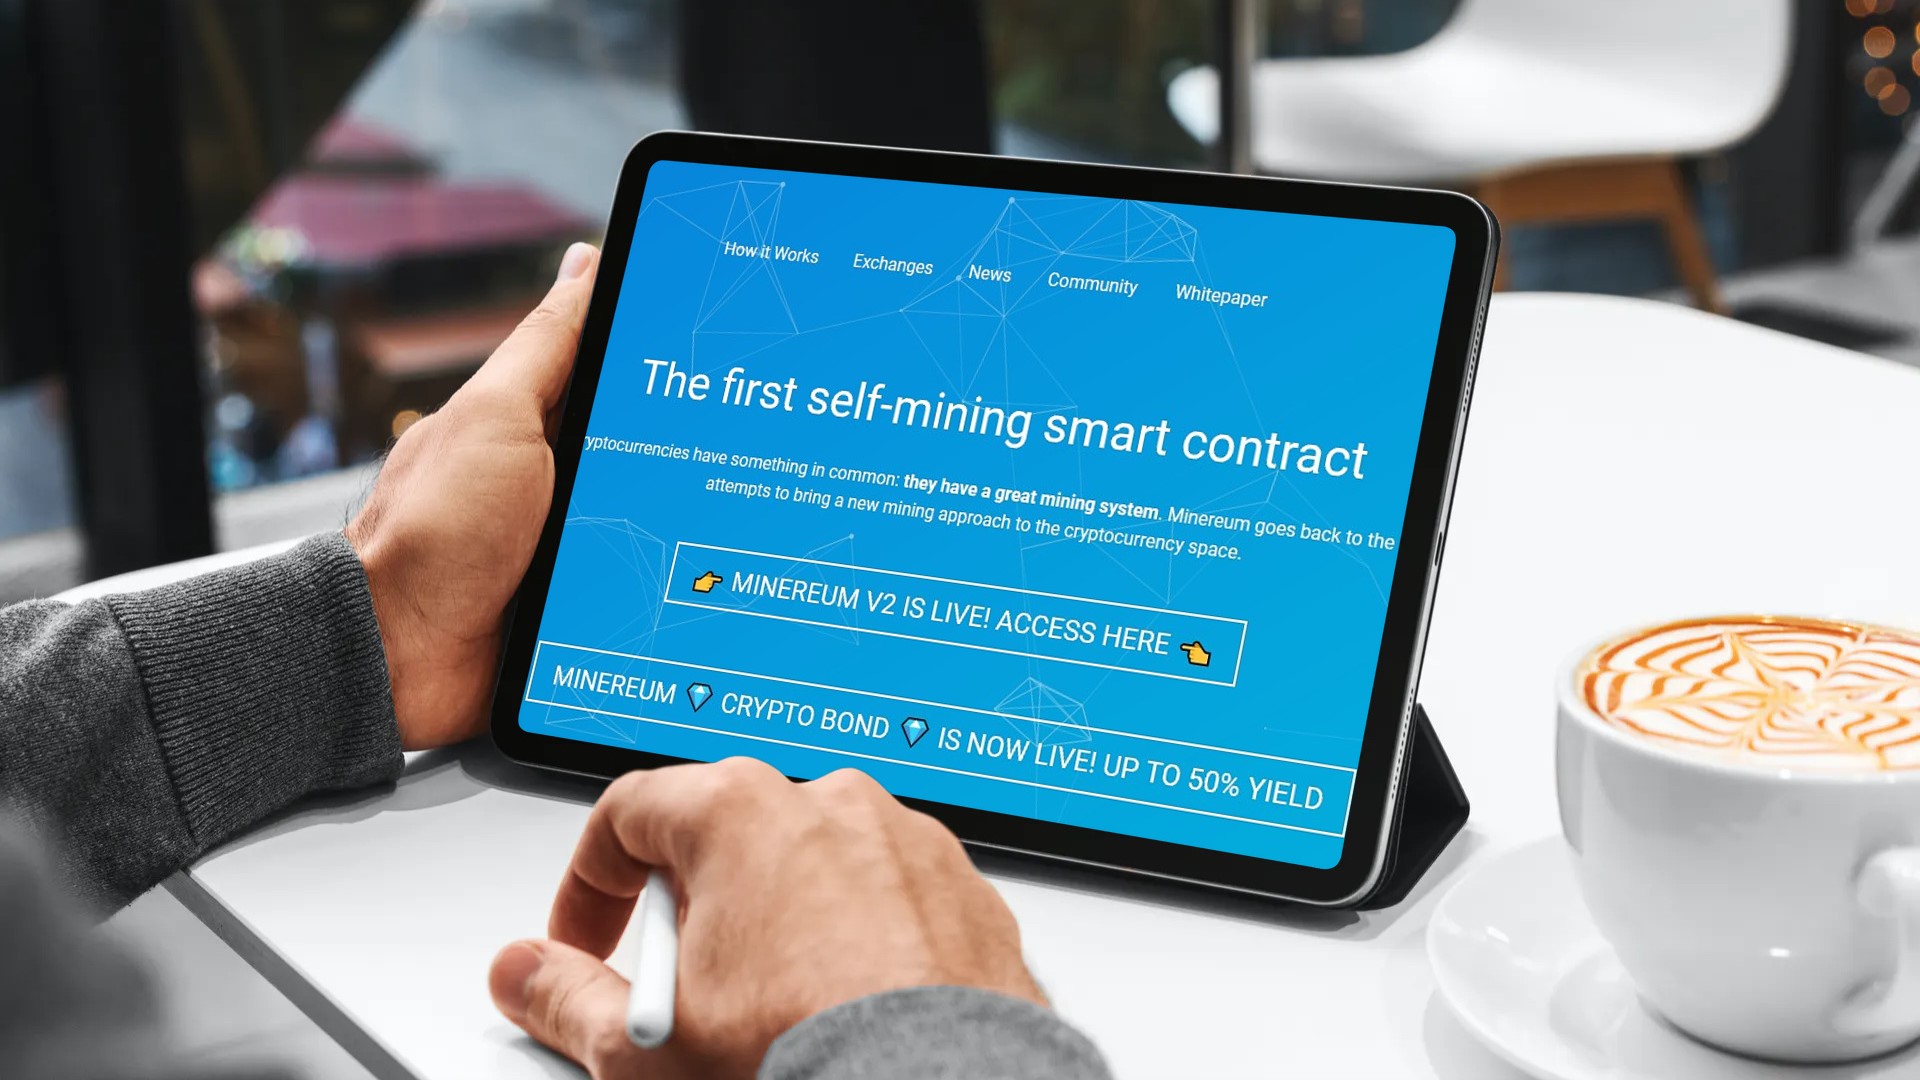 Minereum BSC WEB3 - The First Self-Mining Smart Contract for Binance Smart Chain